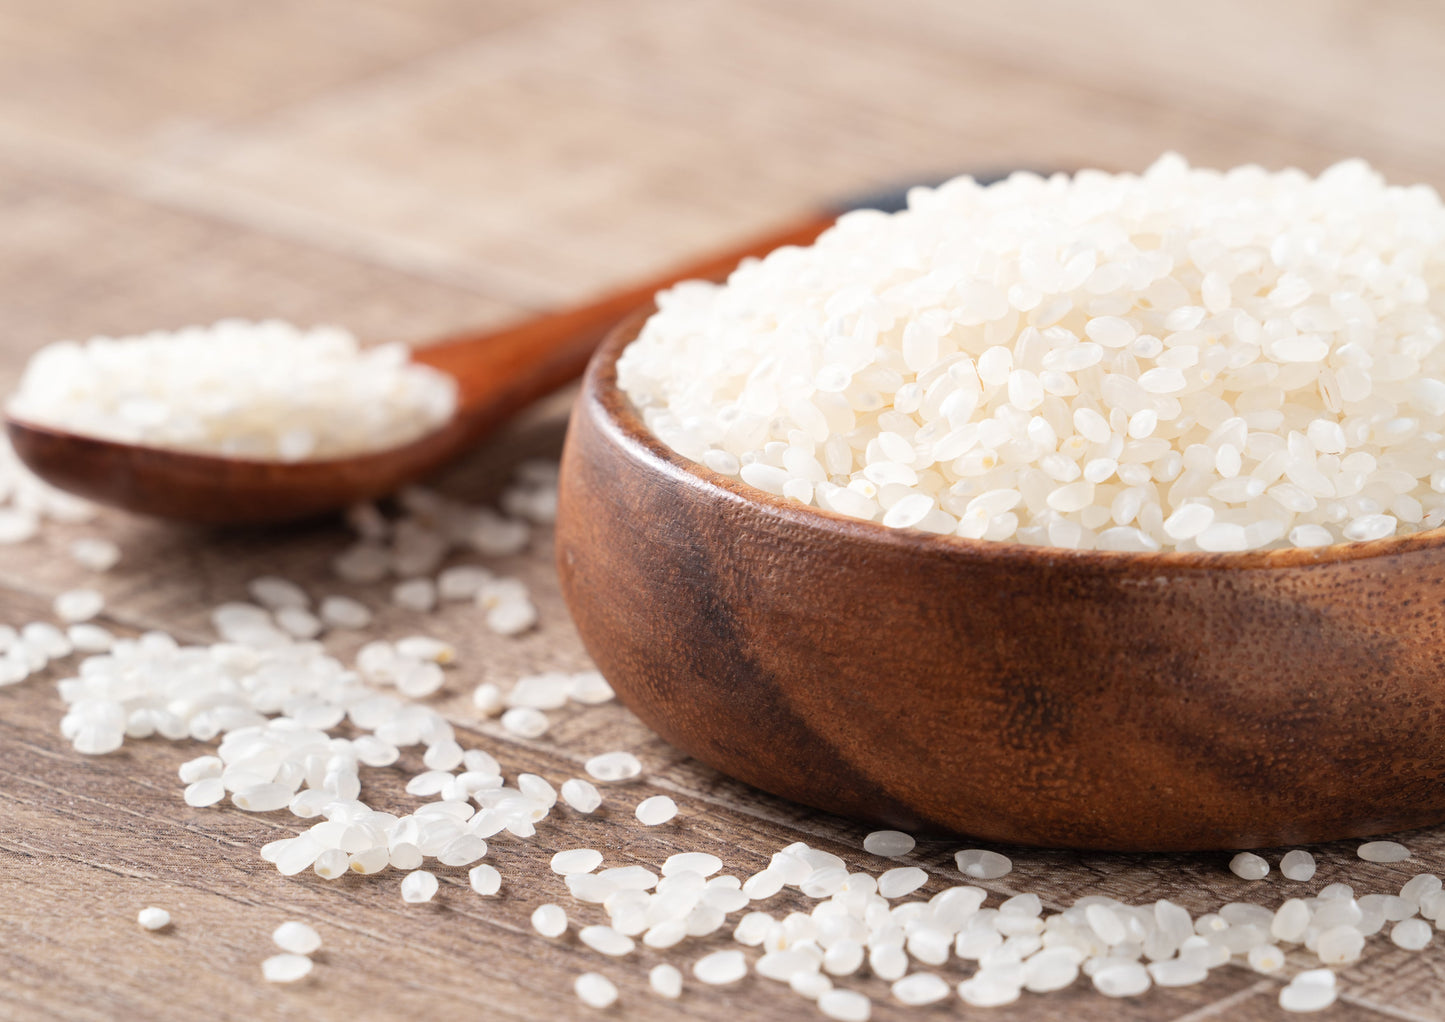 Short-Grain White Rice — Premium Japanese Style Short-Grain Rice, Perfectly Sticky, Vegan, Kosher, Bulk Rice. Easy to Cook. Great as a Side Dish. Great for Sushi, Rice Salads, and Desserts